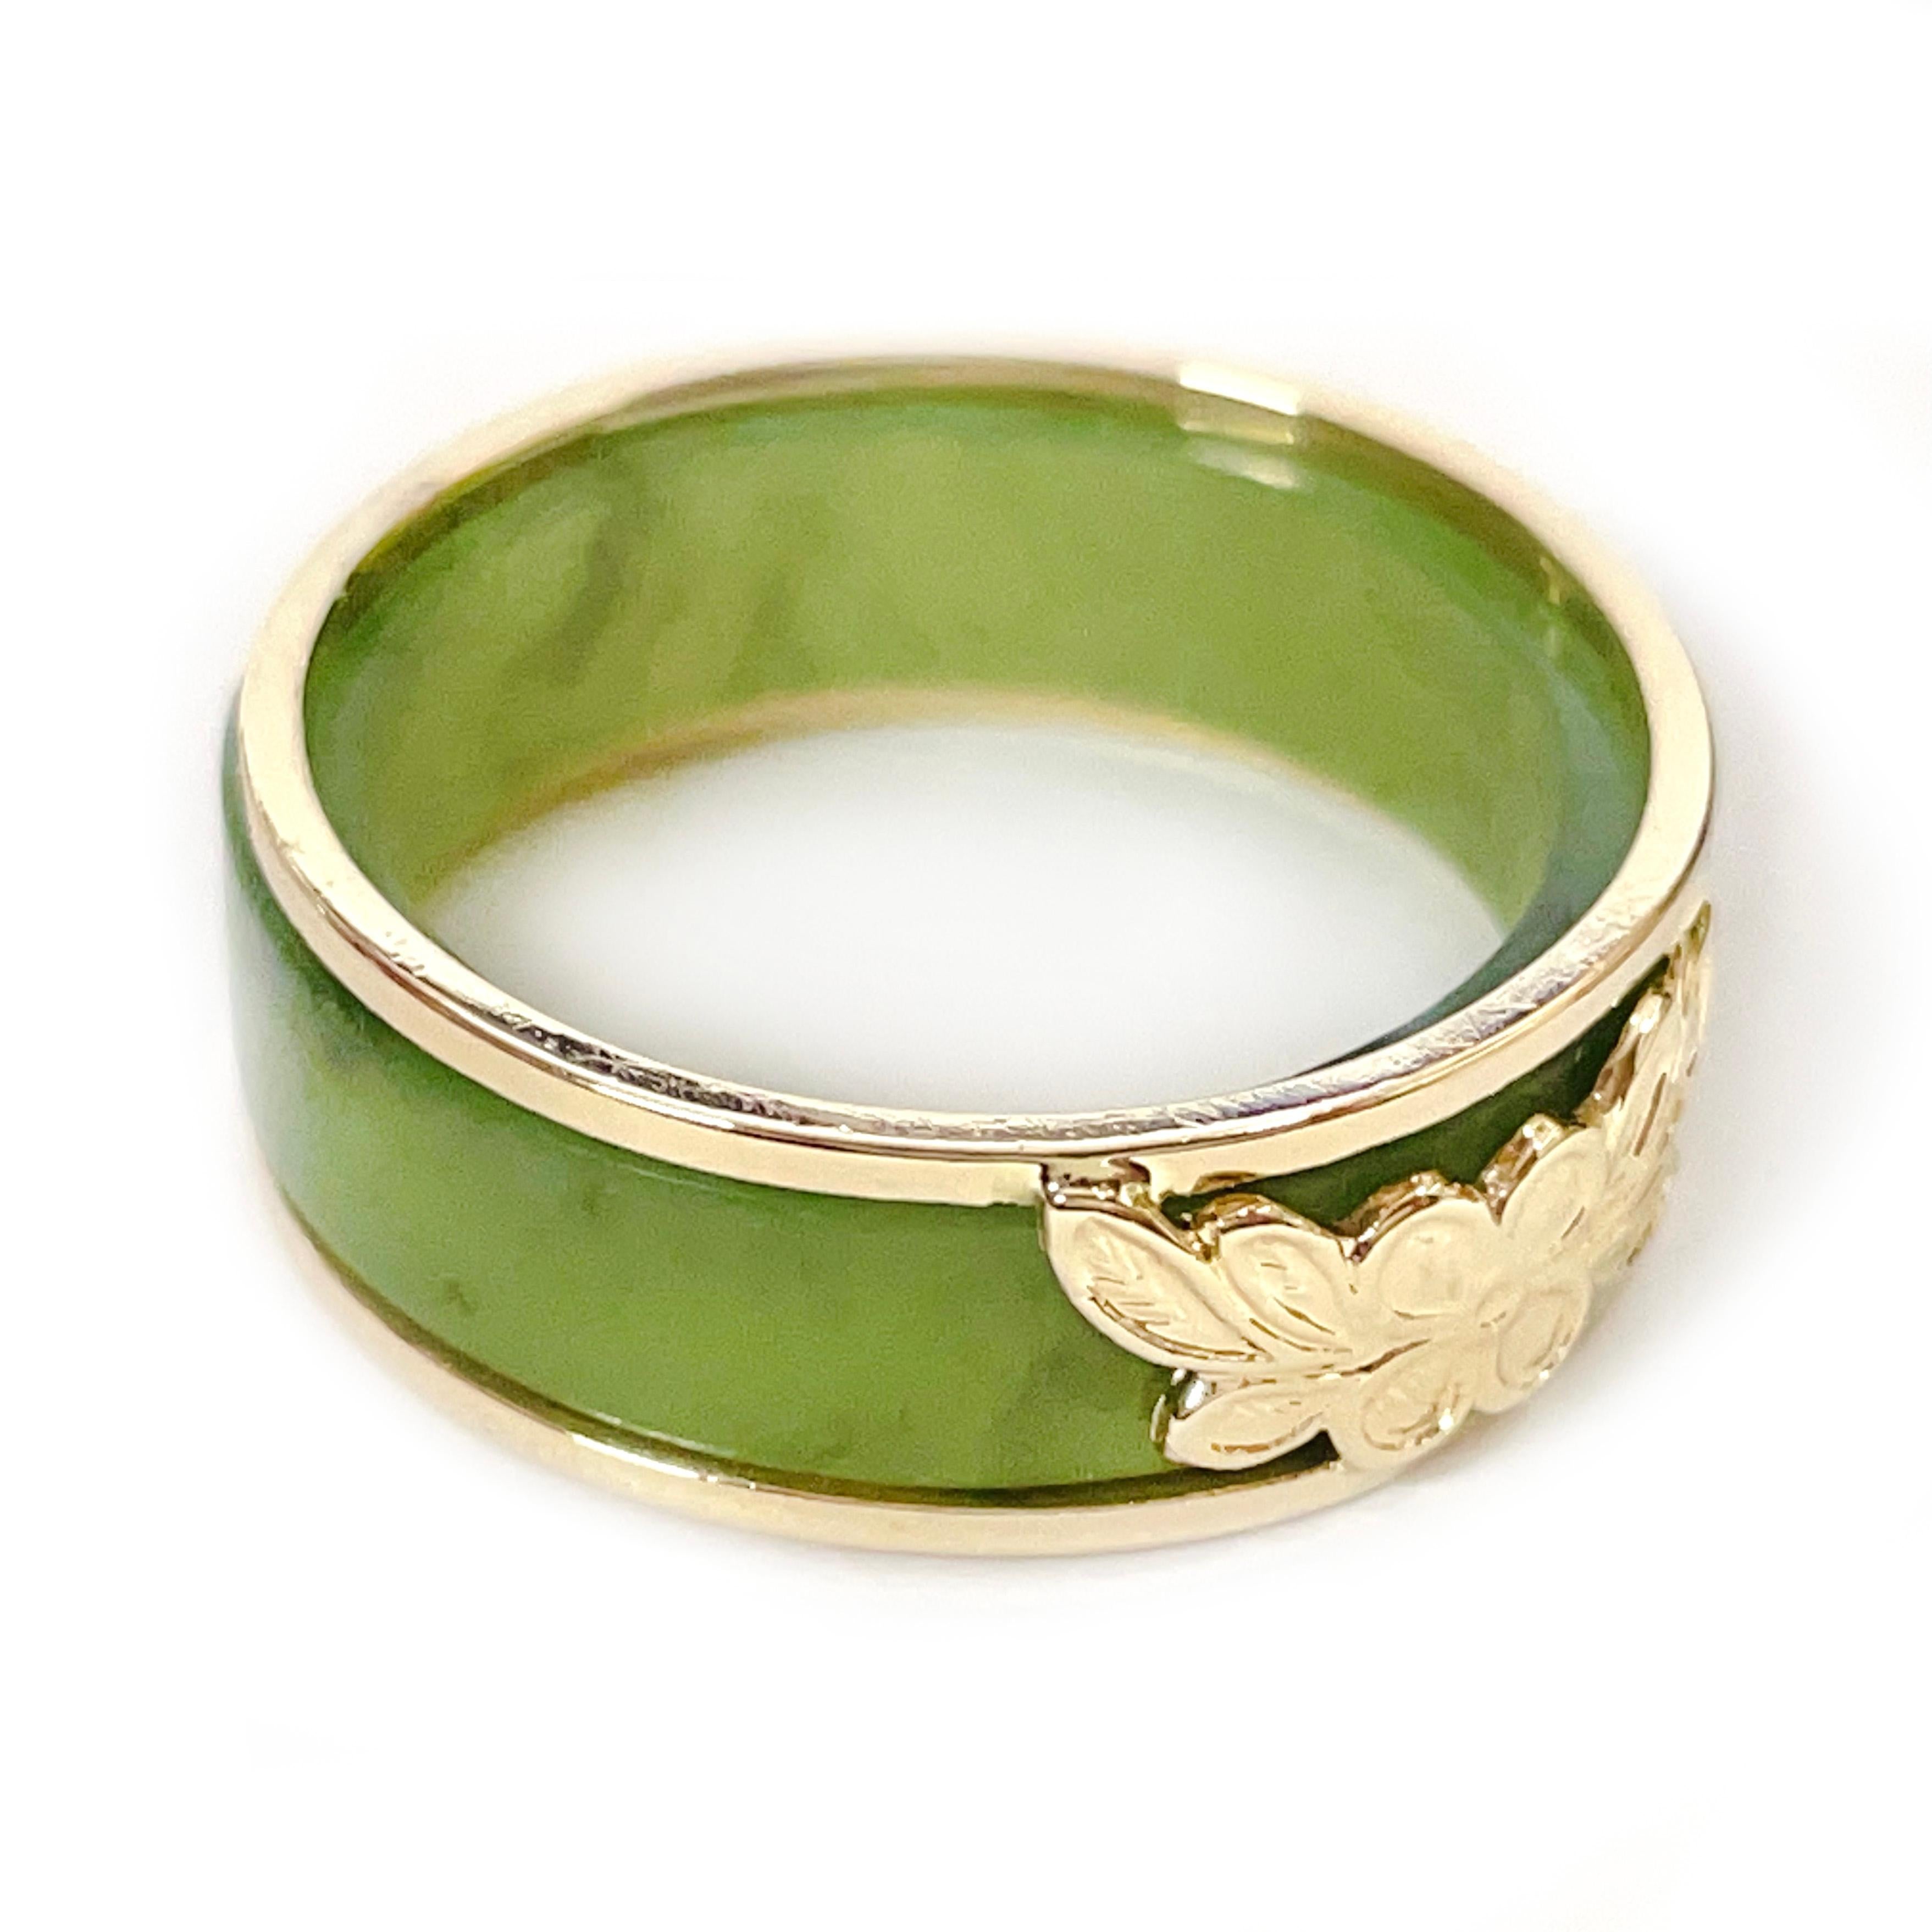 14 Karat Yellow Gold Green Jade Two-Part Ring. Two rings in one, a beautiful light sage green jade band and a yellow gold two band ring with a a four petal flower and leaves at the center. The ring measure 7mm wide and 2.4mm thick. The ring is size